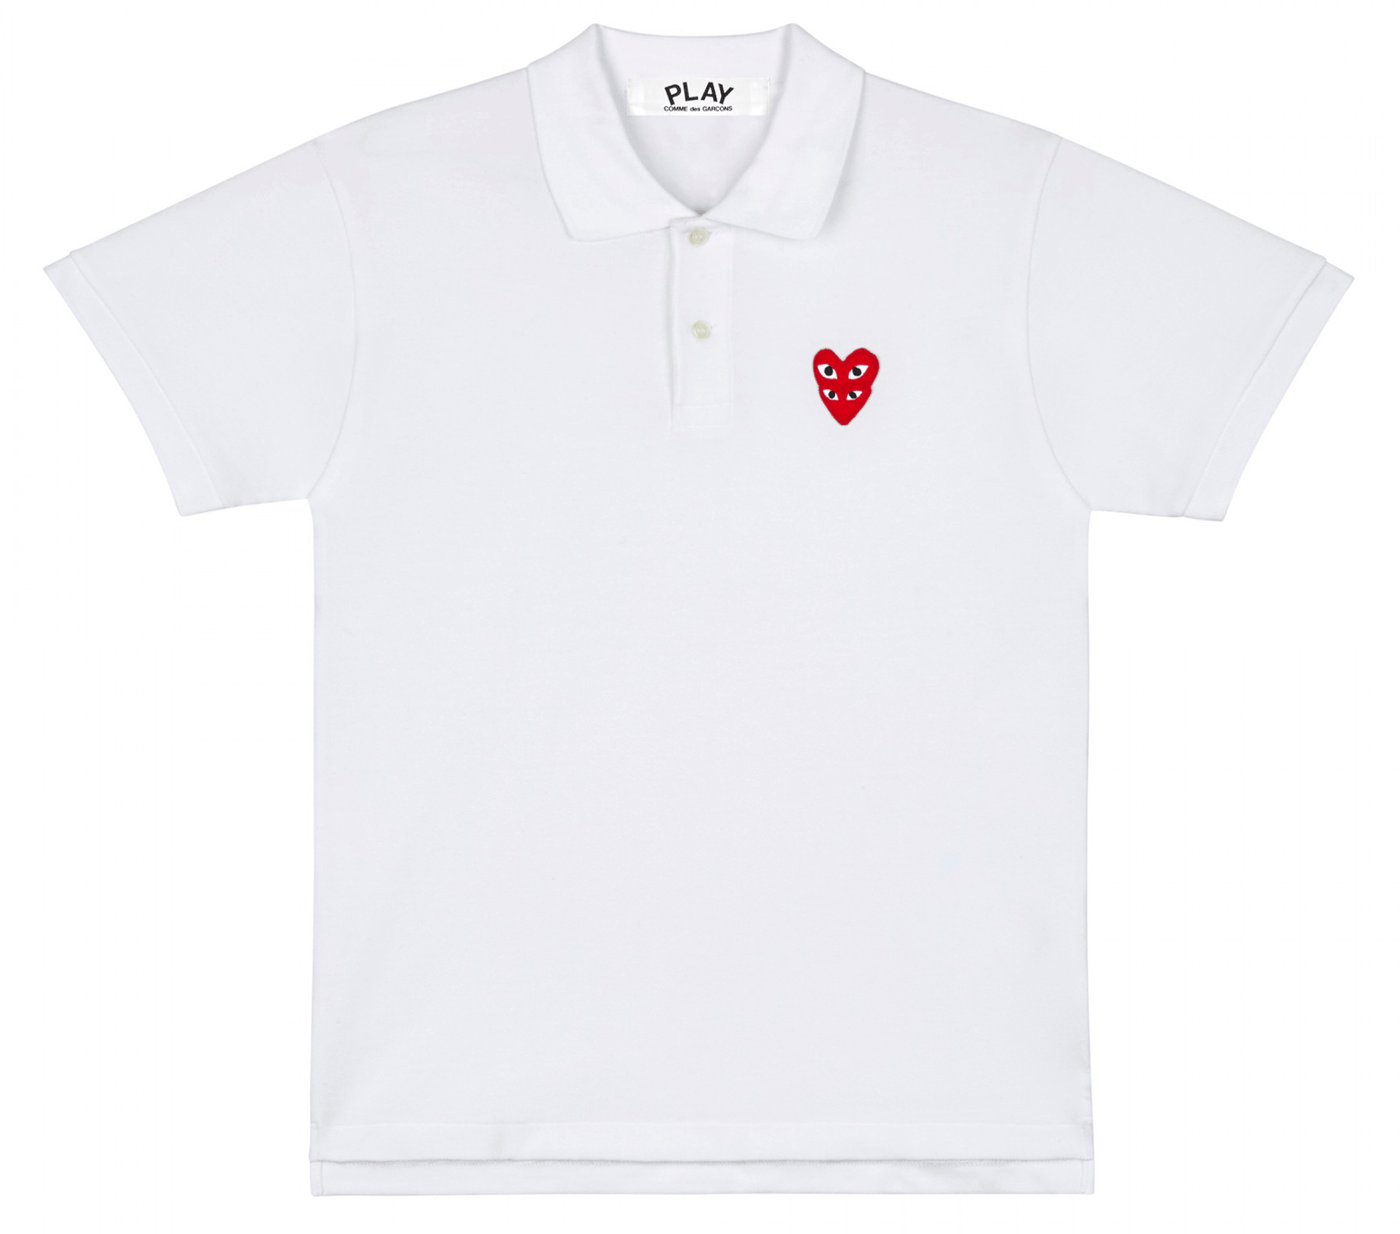 Comme-des-Garcons-Play-Polo-Shirt-with-Double-Eye-Women-White-1